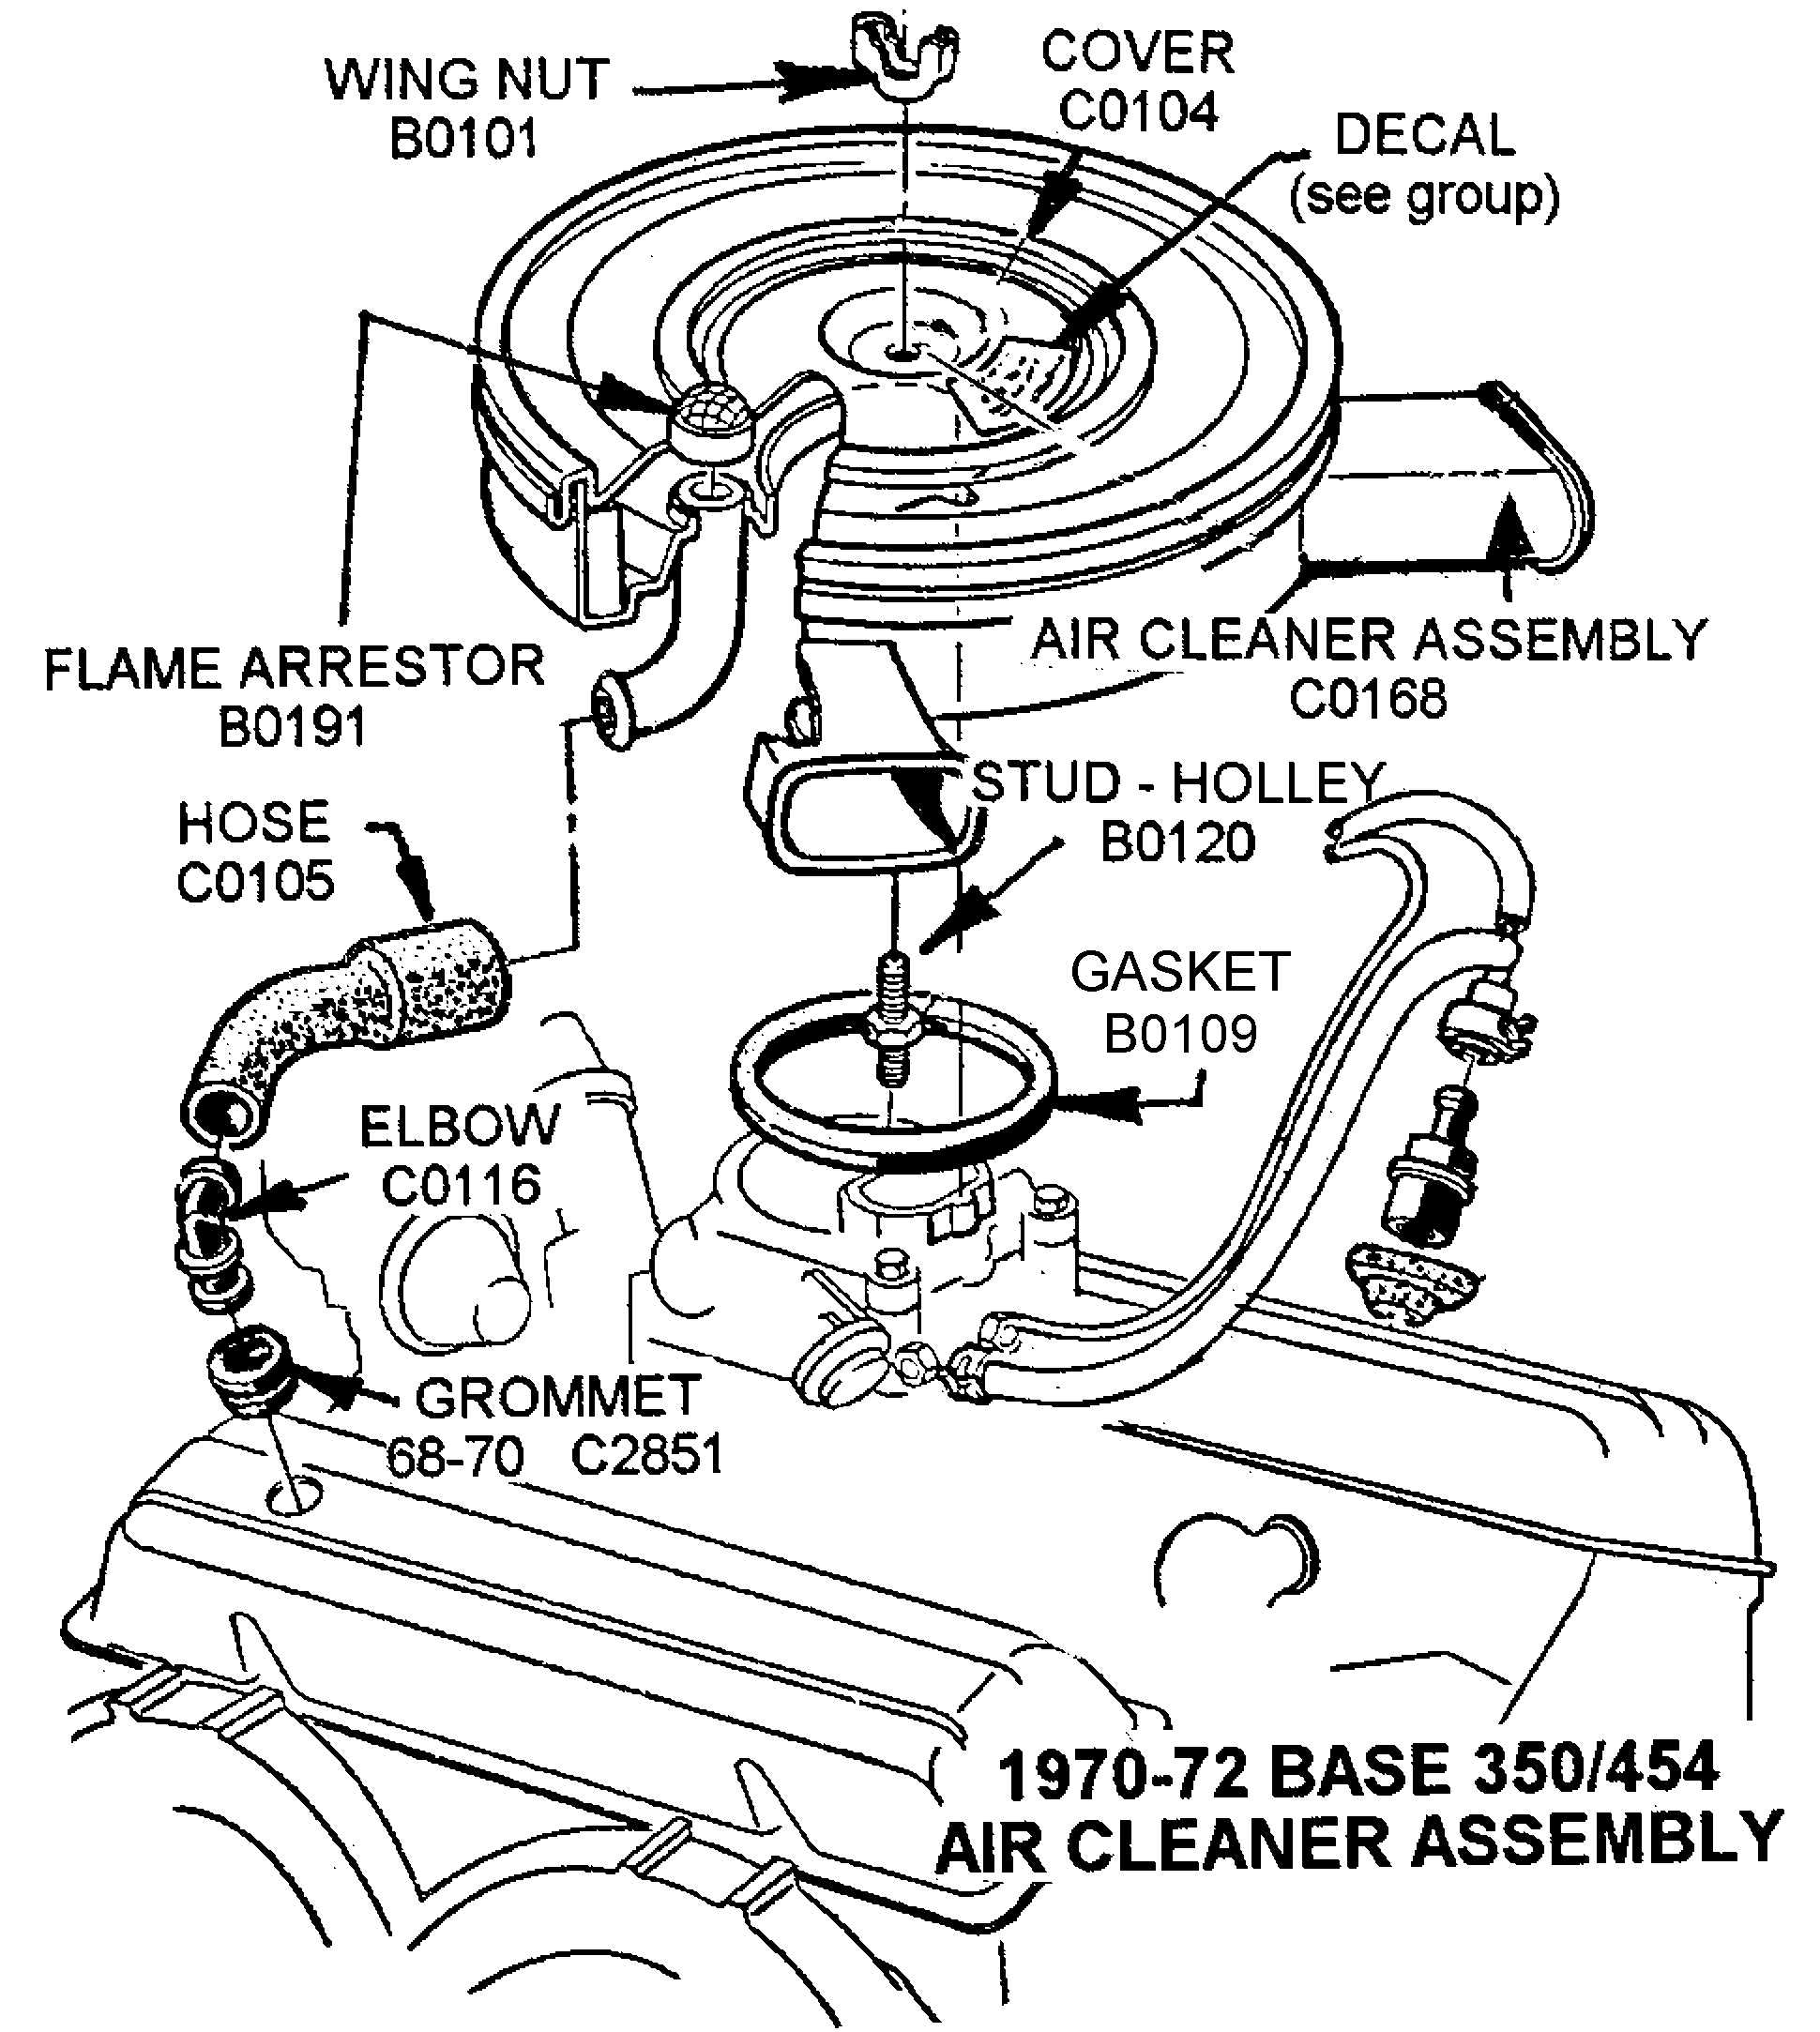 1970-72 Base 350/454 Air Cleaner Assembly - Diagram View ...